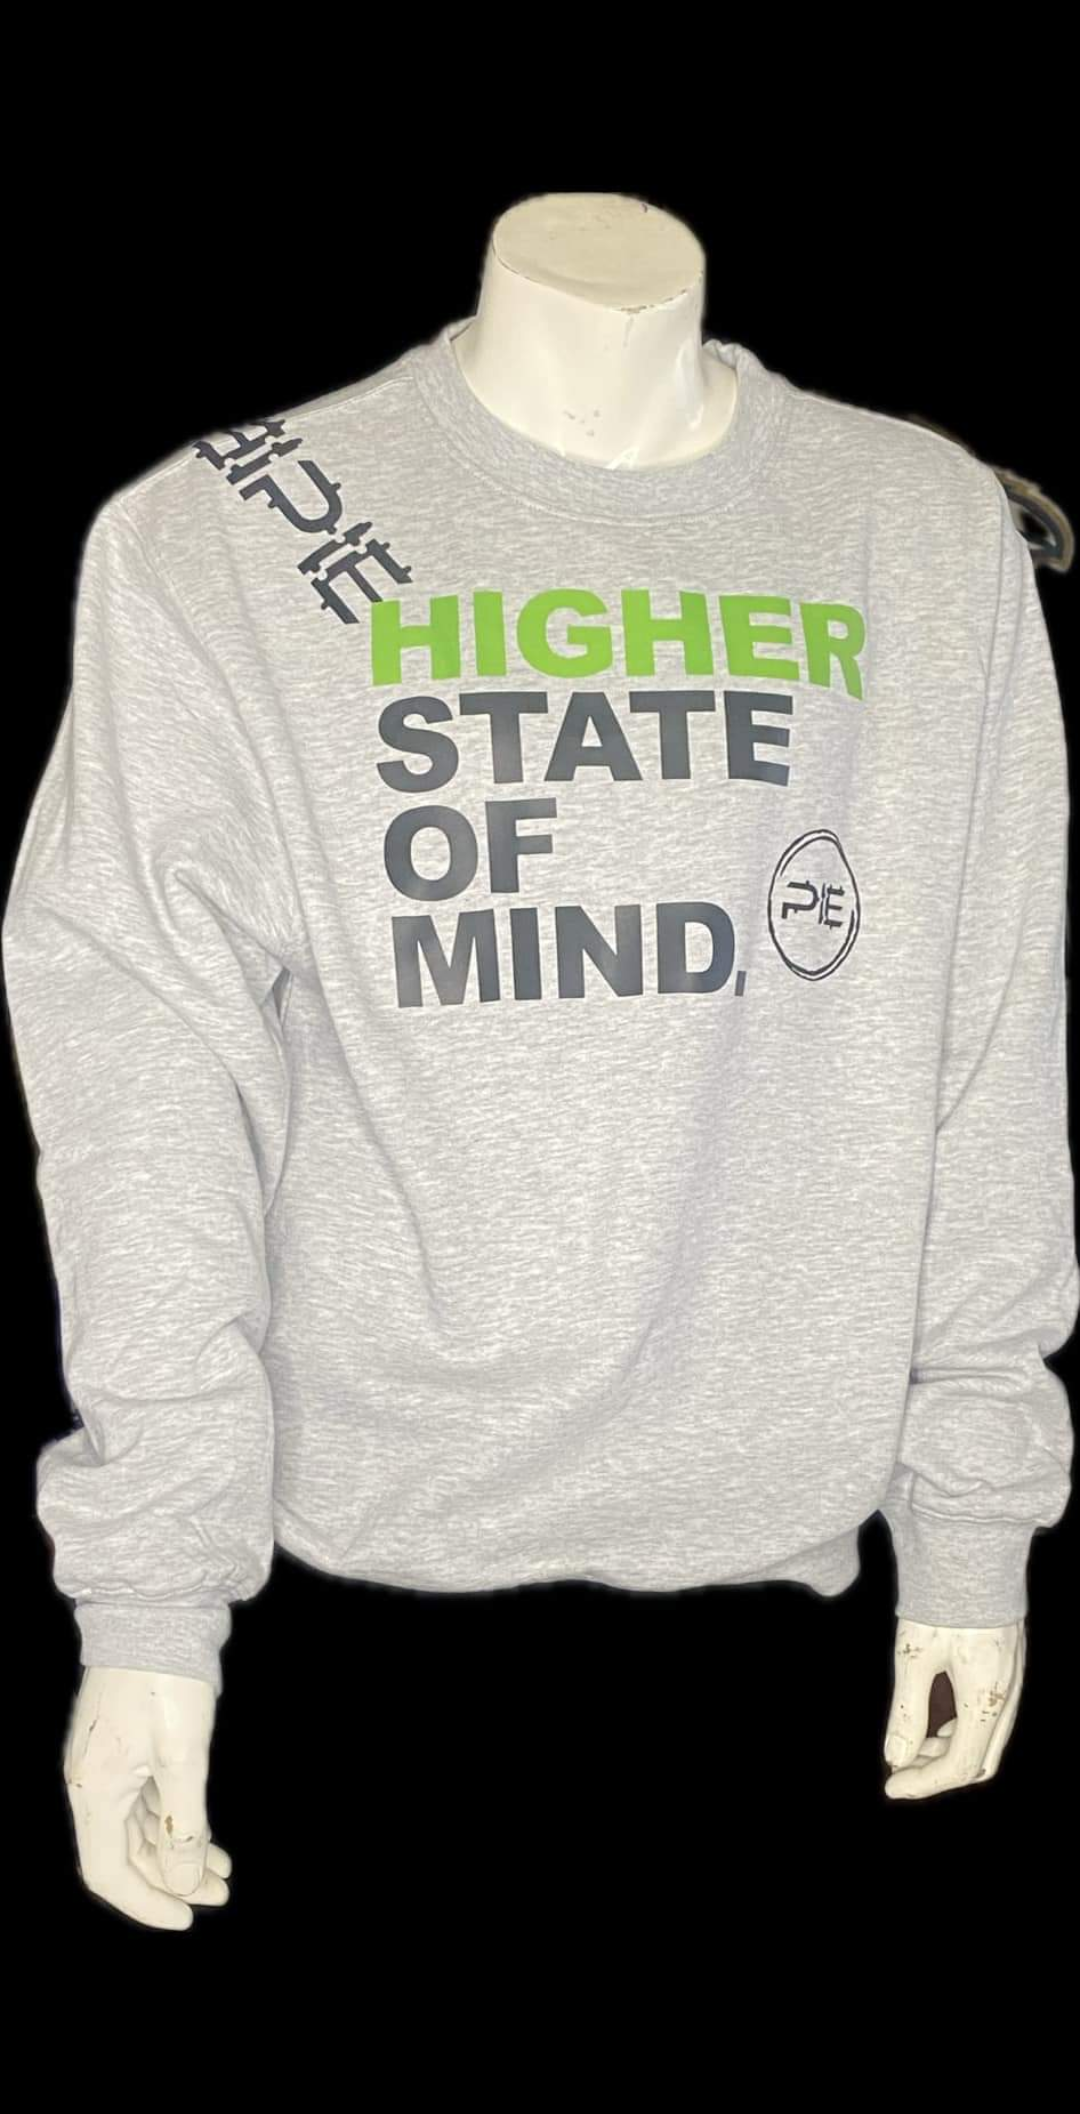 Higher State of Mind Sweater